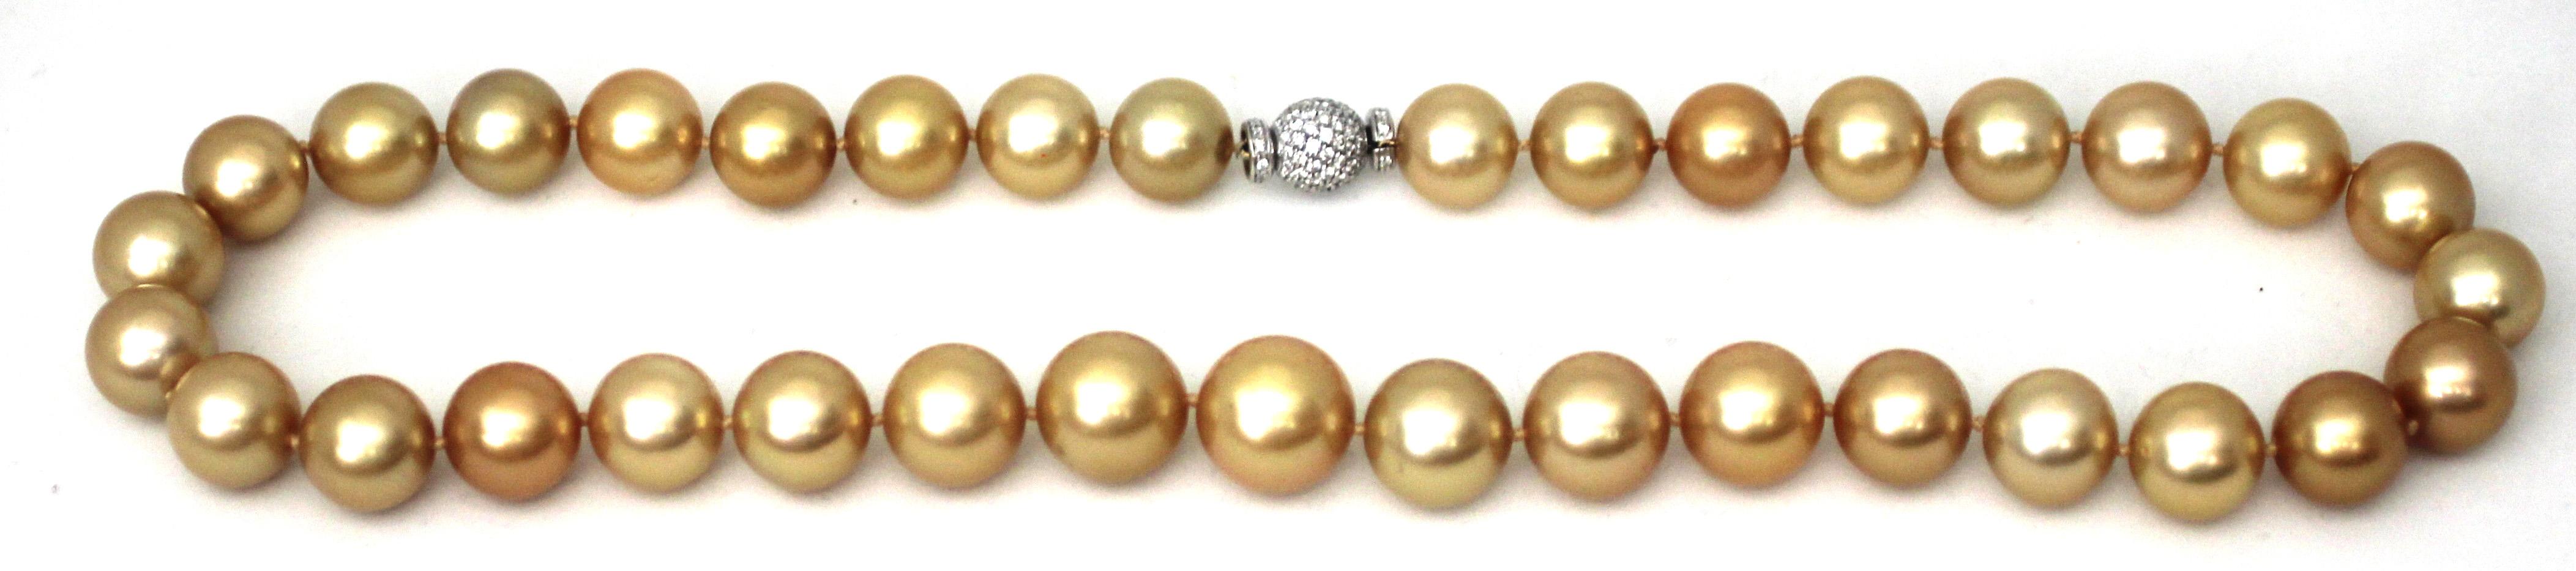 are gold pearls natural